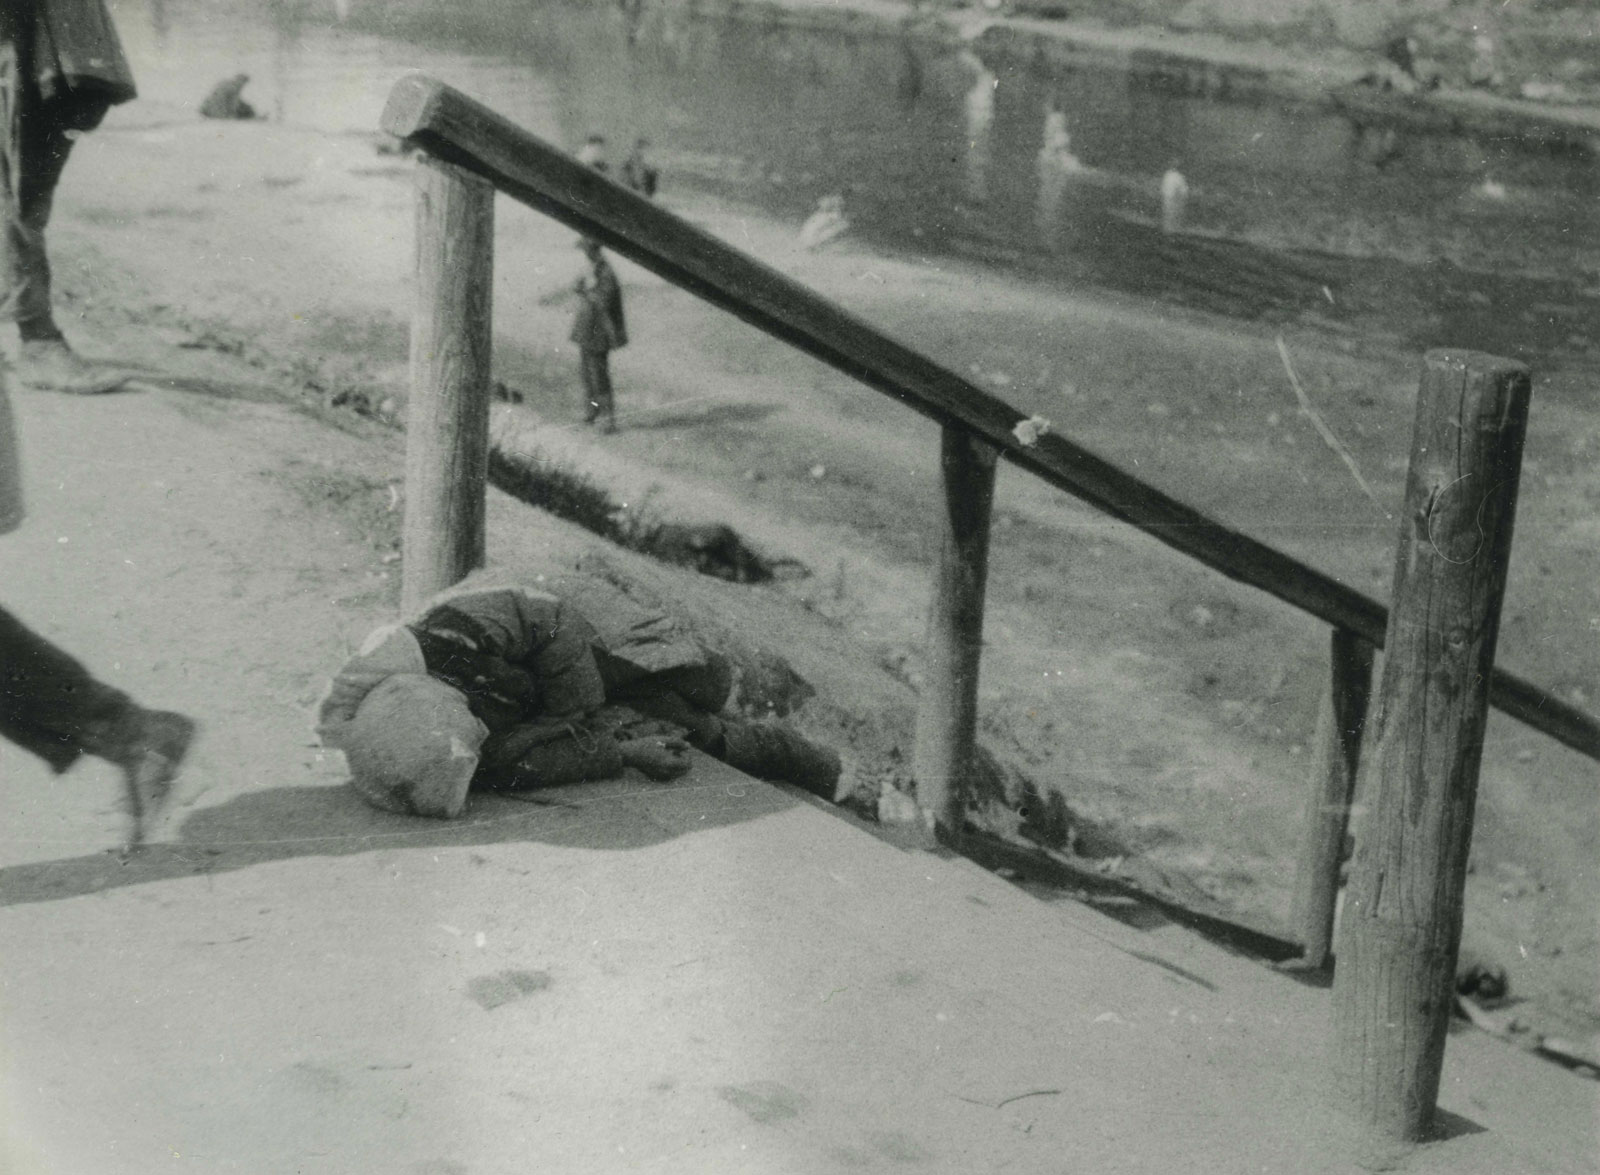 A black and white photograph of a girl's body lying alongside a flight of stairs outside.